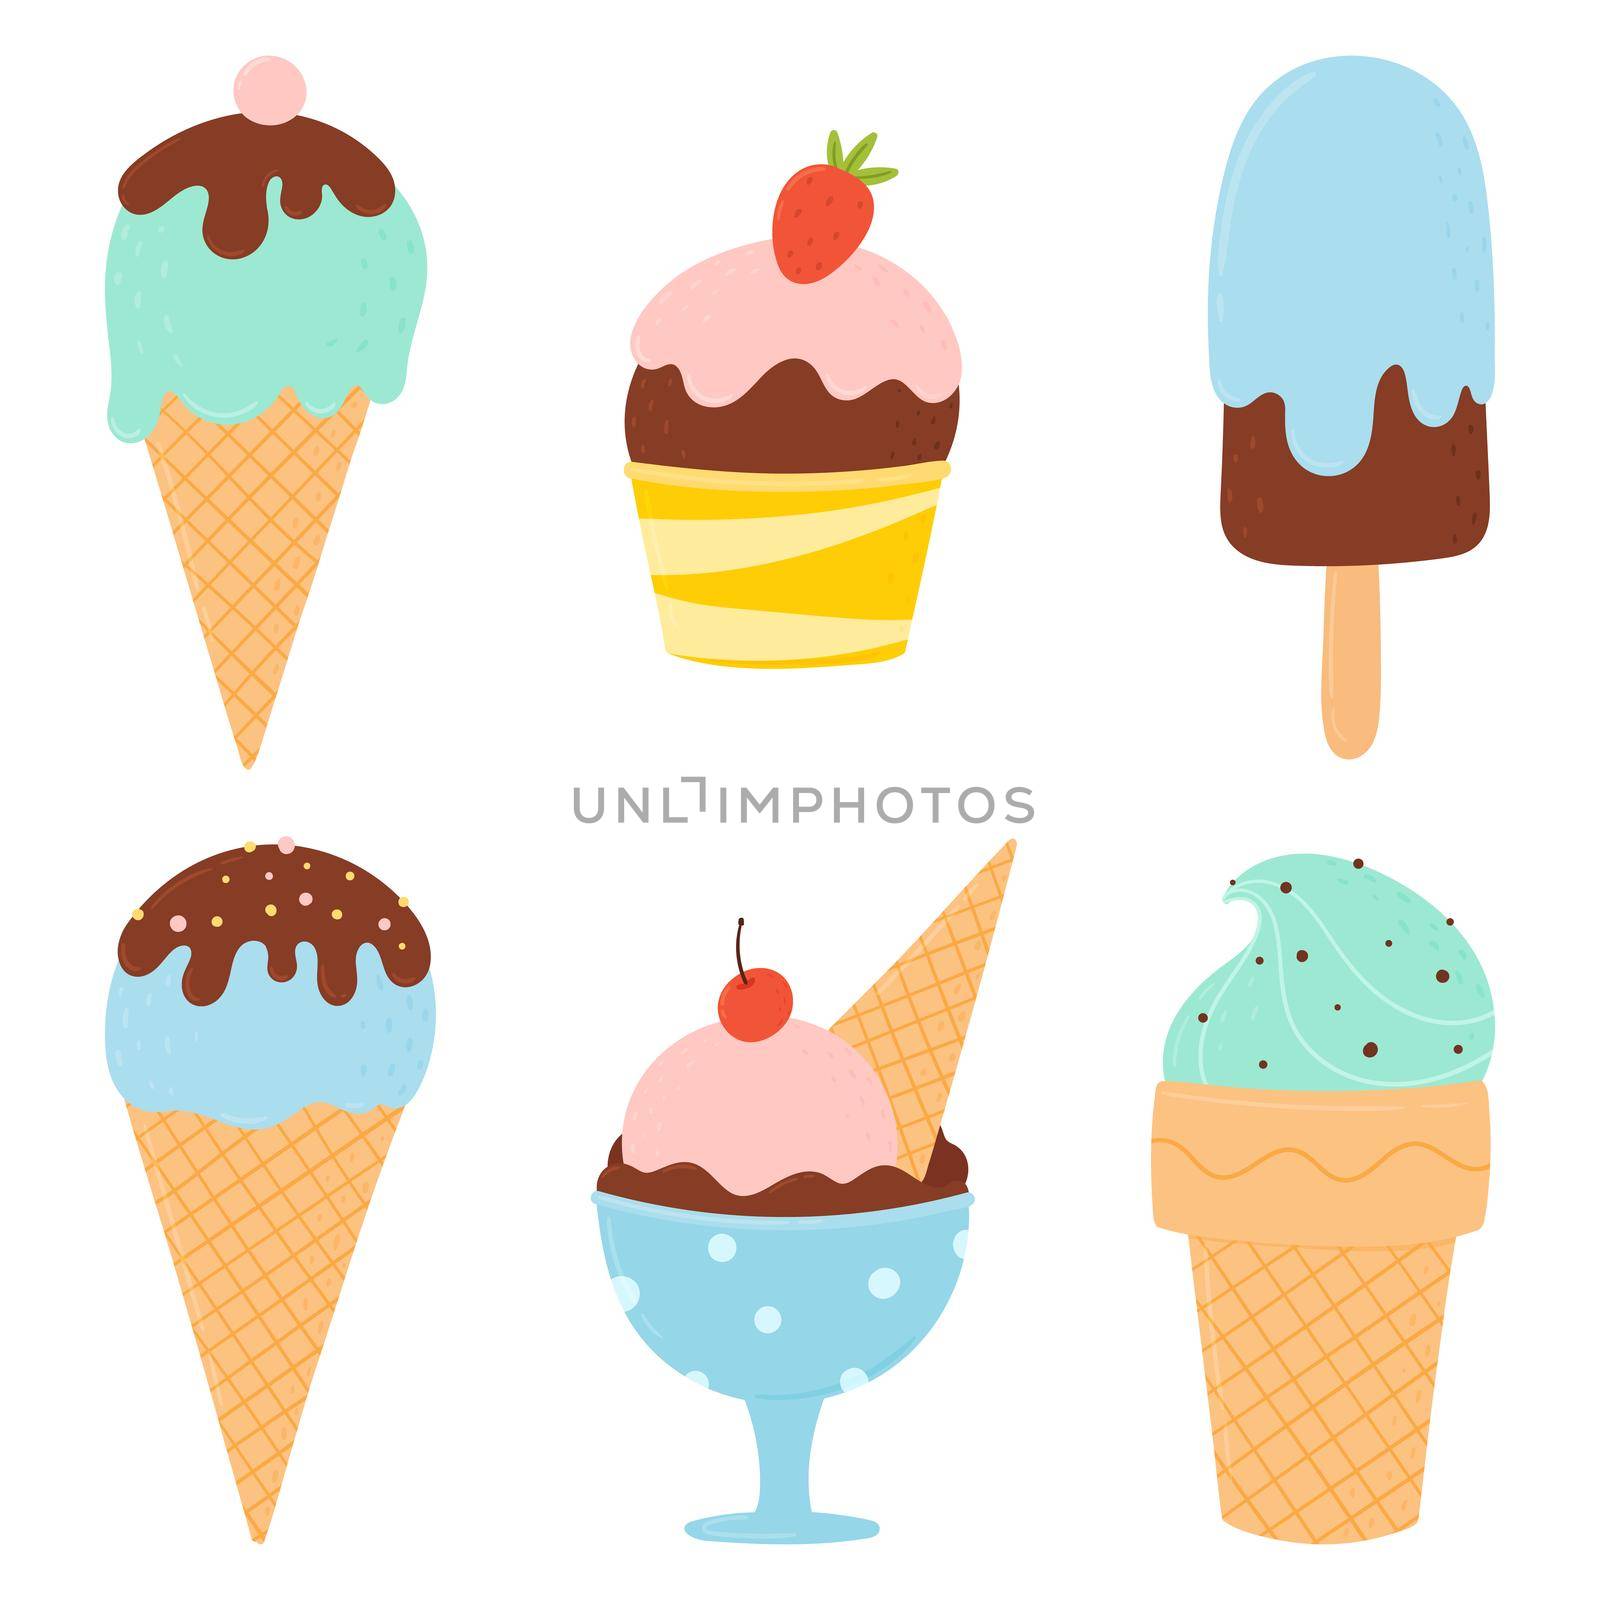 Ice cream set. Modern vector hand drawn illustrations of ice cream in different shapes with fillings, chocolate and fruits. Summer illustration in flat cartoon style isolated on white background.